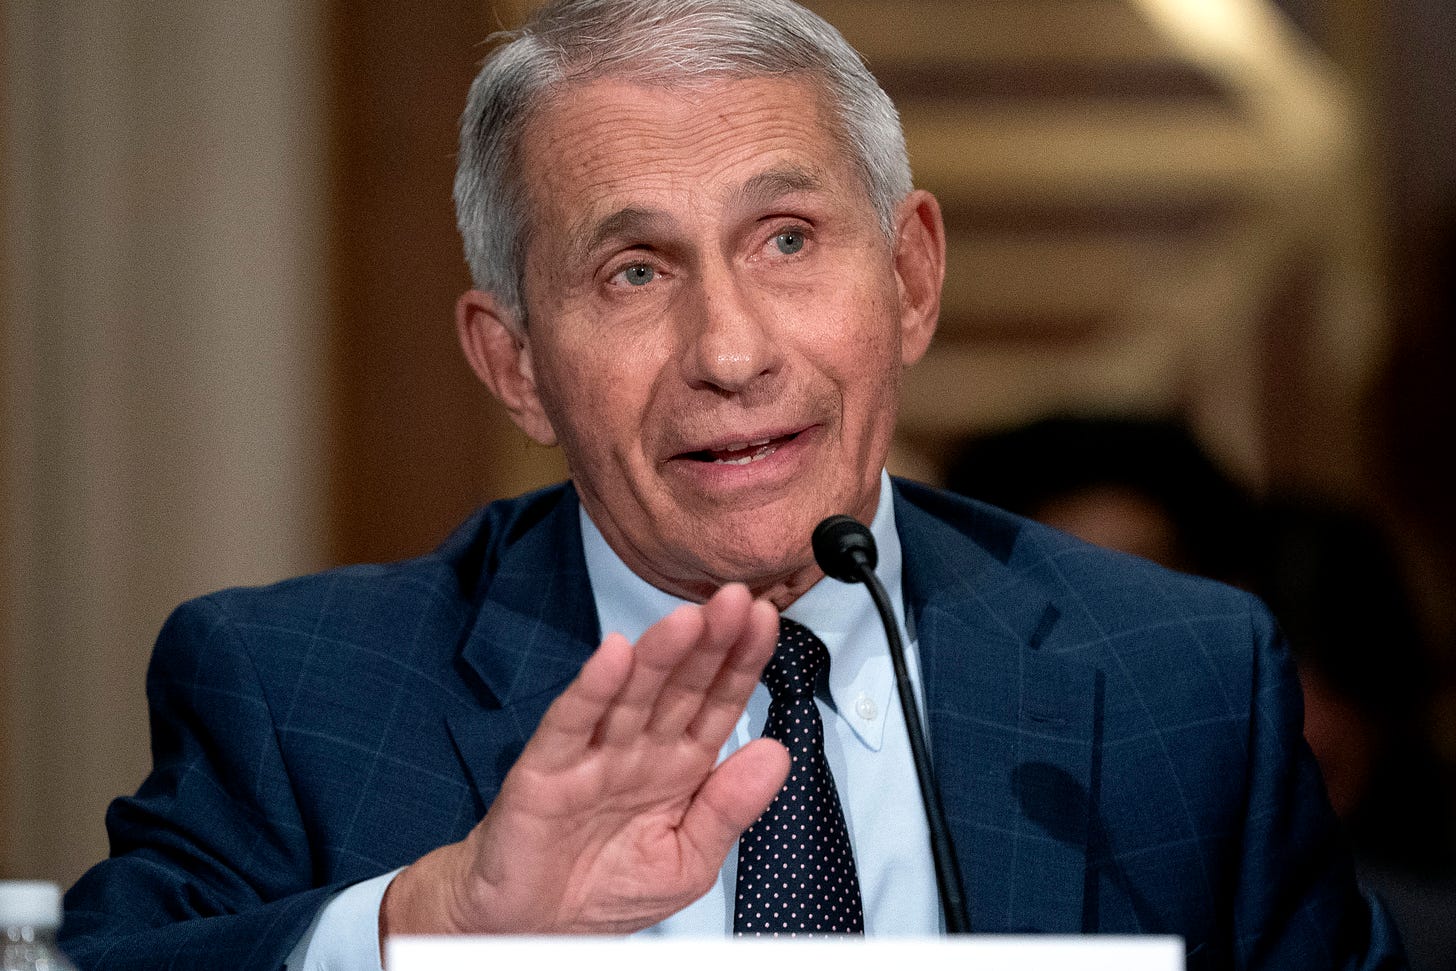 Dr. Fauci on why CDC changed guidelines: Delta is a 'different virus'